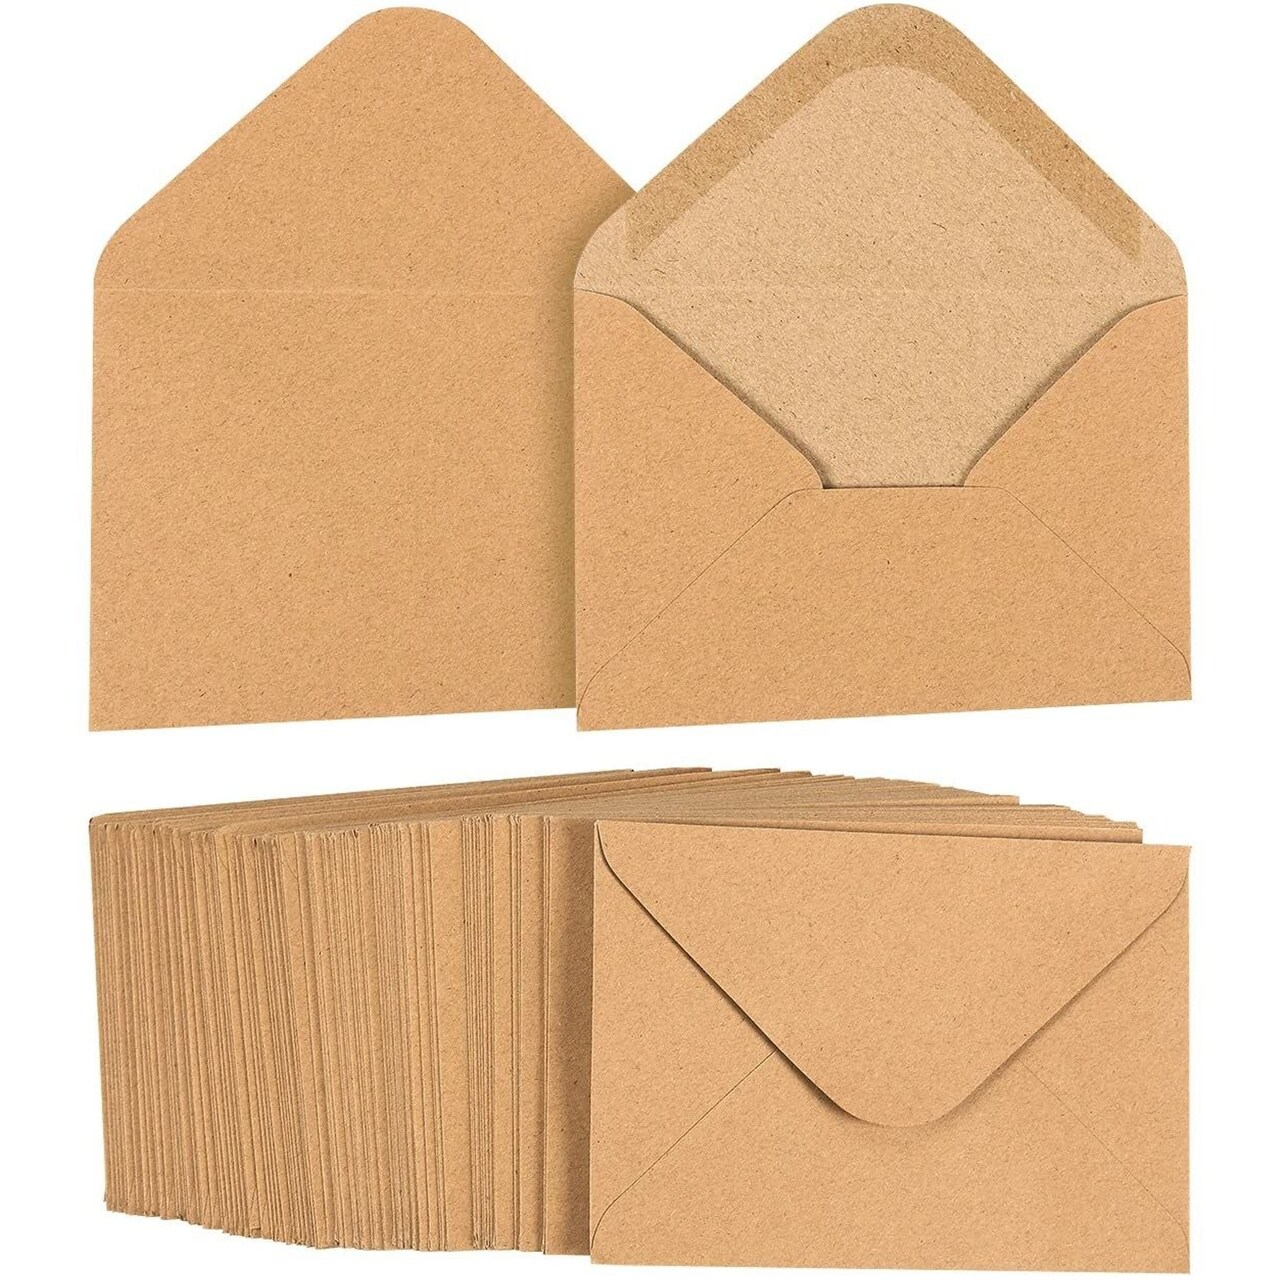 100 Pack Juvale Small Kraft Paper A1 Envelopes for 3x5 inch Cards Wedding Baby Shower Invitations